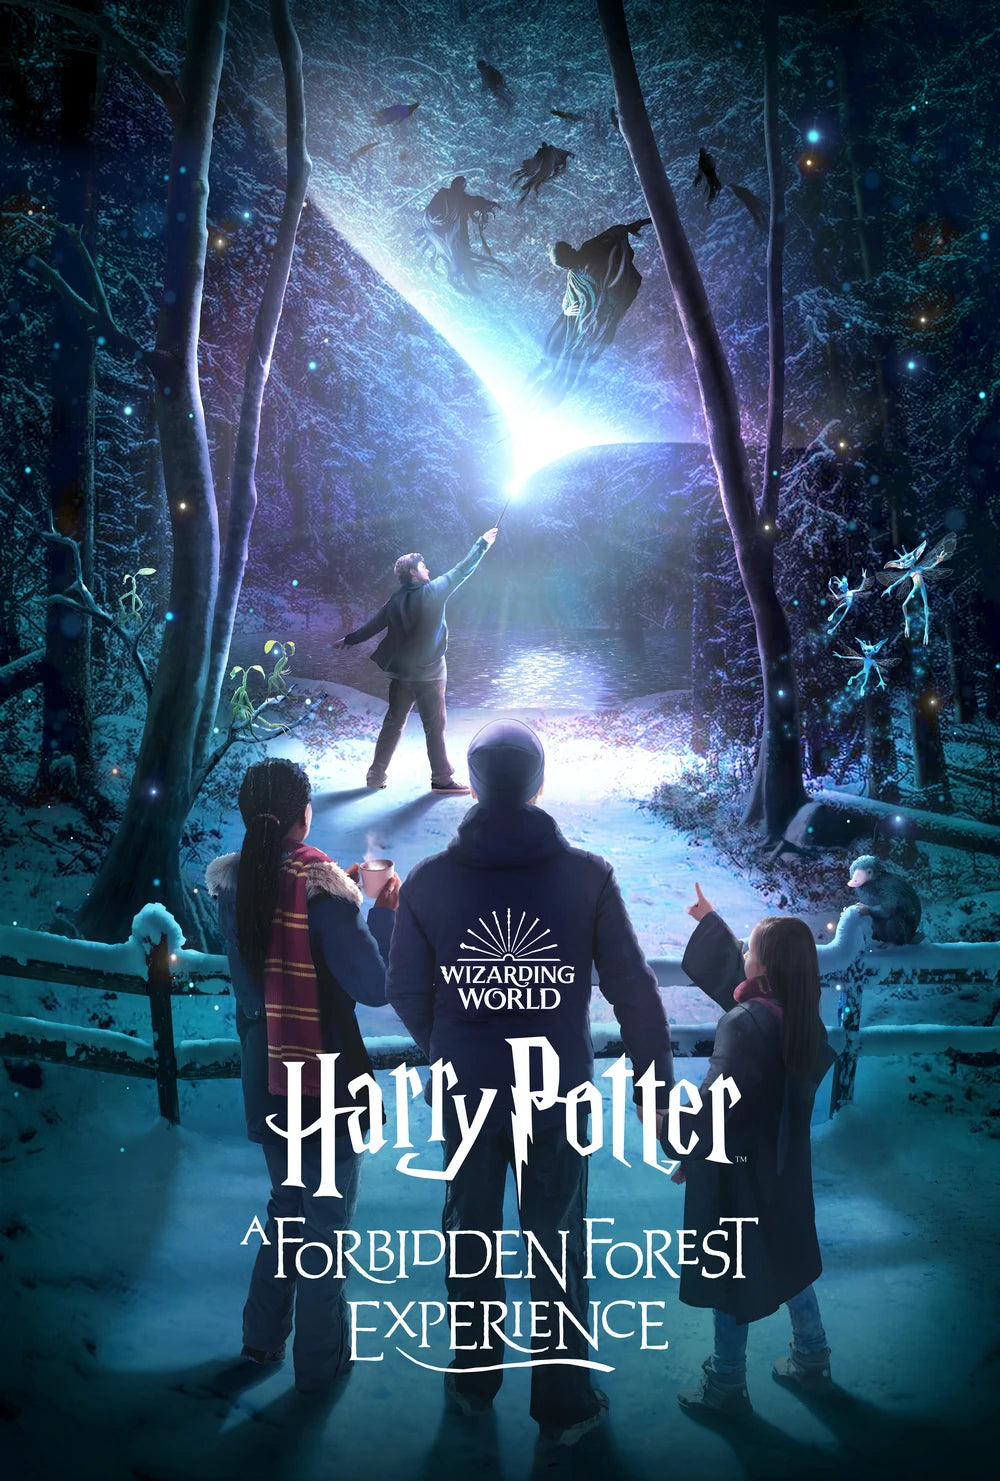 Harry Potter - A Forbidden Forest Experience